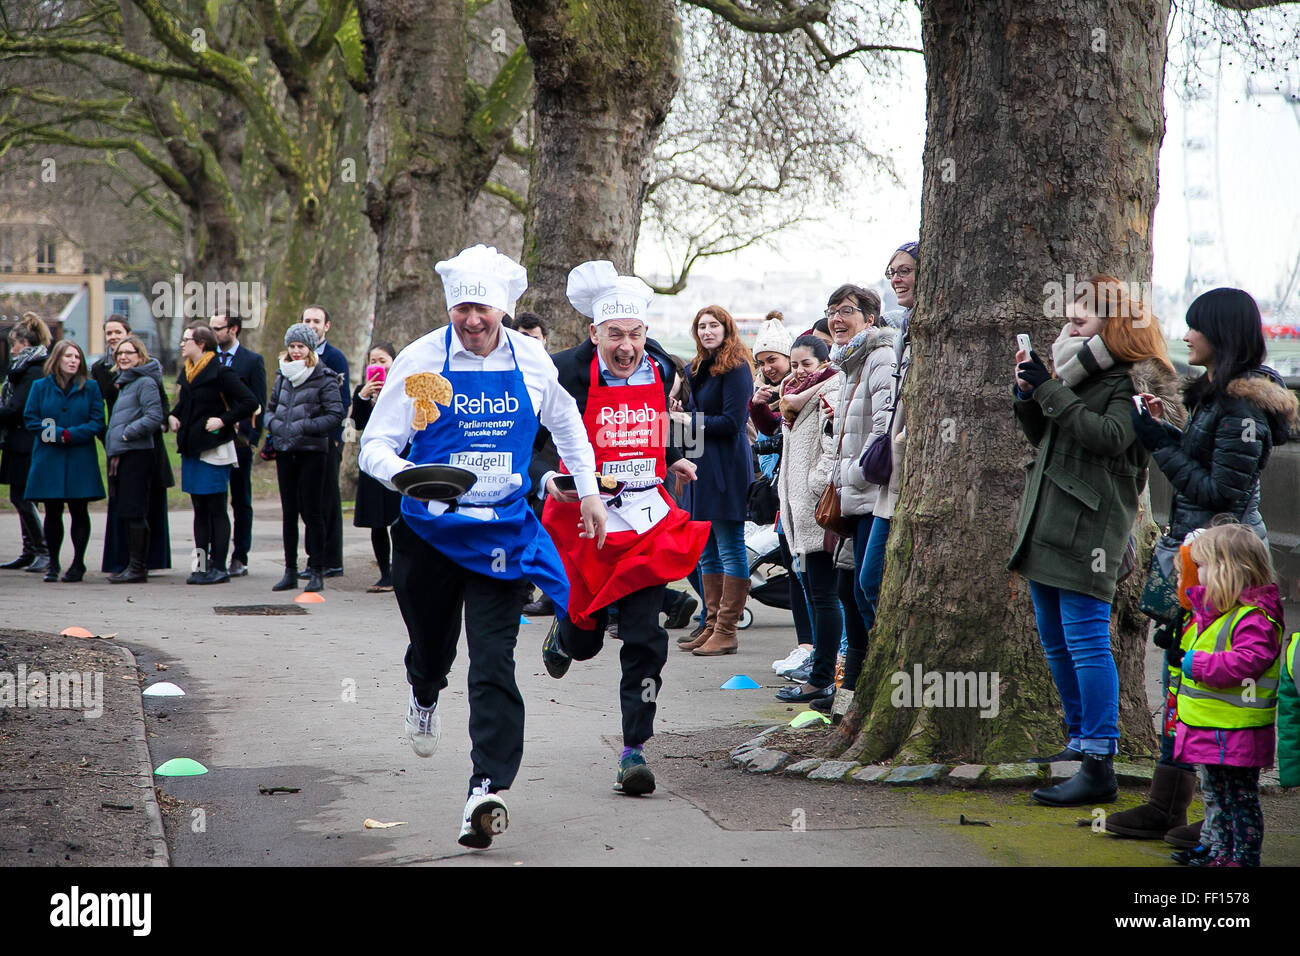 Westminster, London, United Kingdom. February 9th, 2016 - Rehab Parliamentary Pancake Race 2016 takes place as Lord Porter of Spalding CBE and Alastair Stewart OBE, ITV news presenter race against each other while tossing pancakes Credit:  Dinendra Haria/Alamy Live News Stock Photo